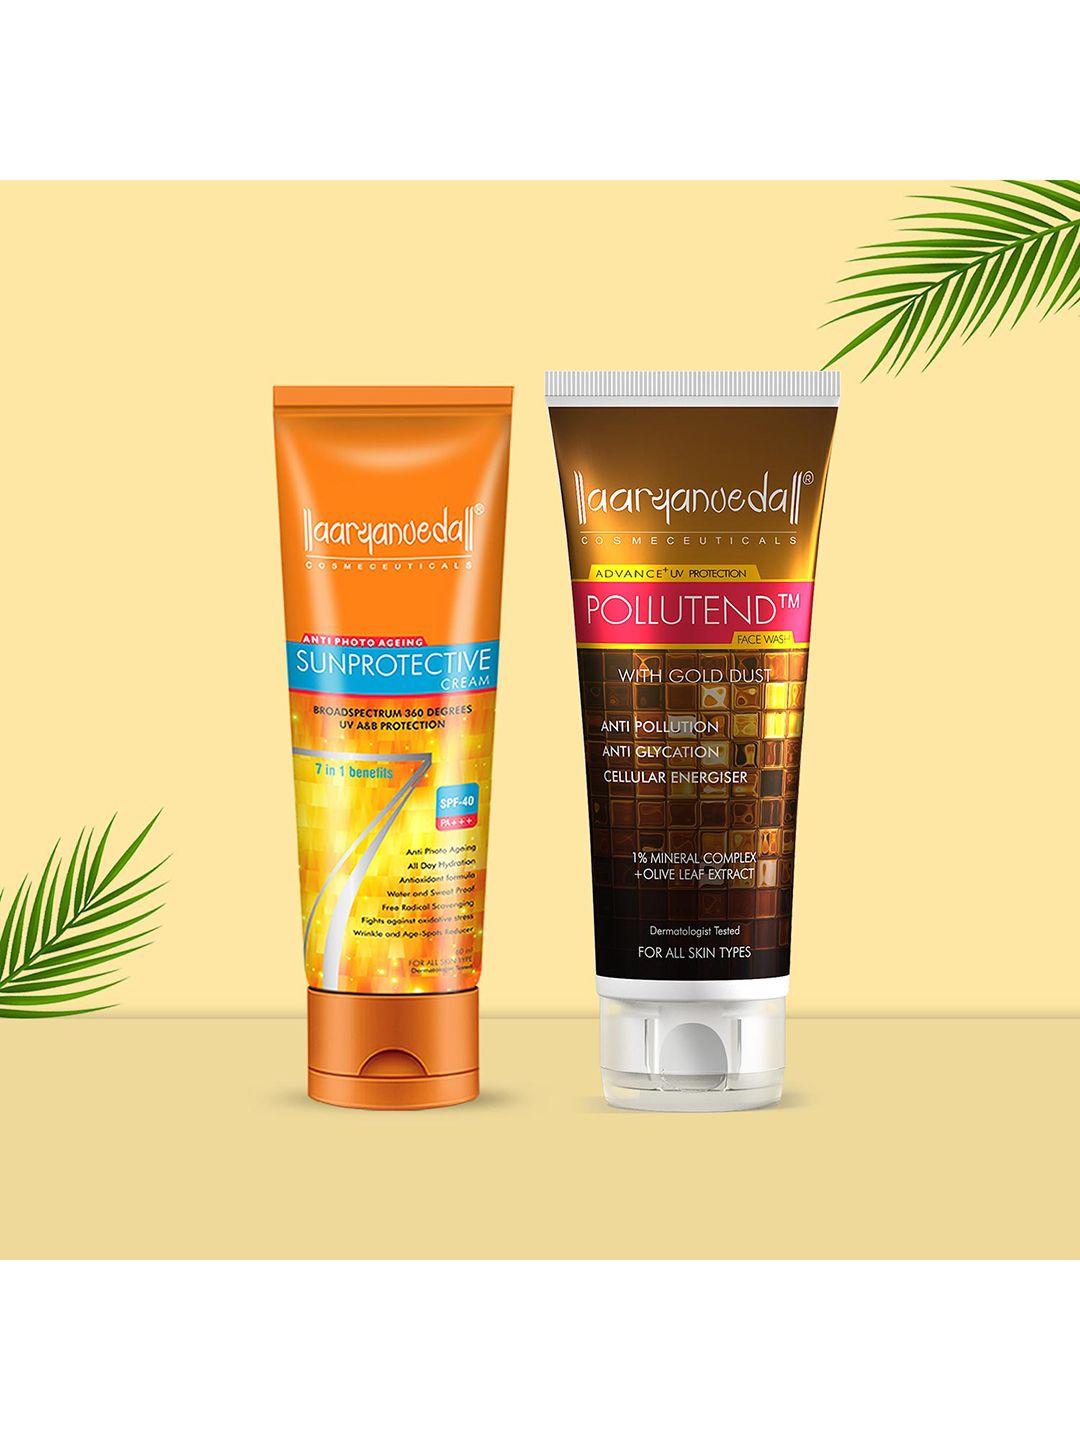 aryanveda-sunscreen-spf-40-pa+++-with-pollutend-face-wash-for-sunprotective-120g-each